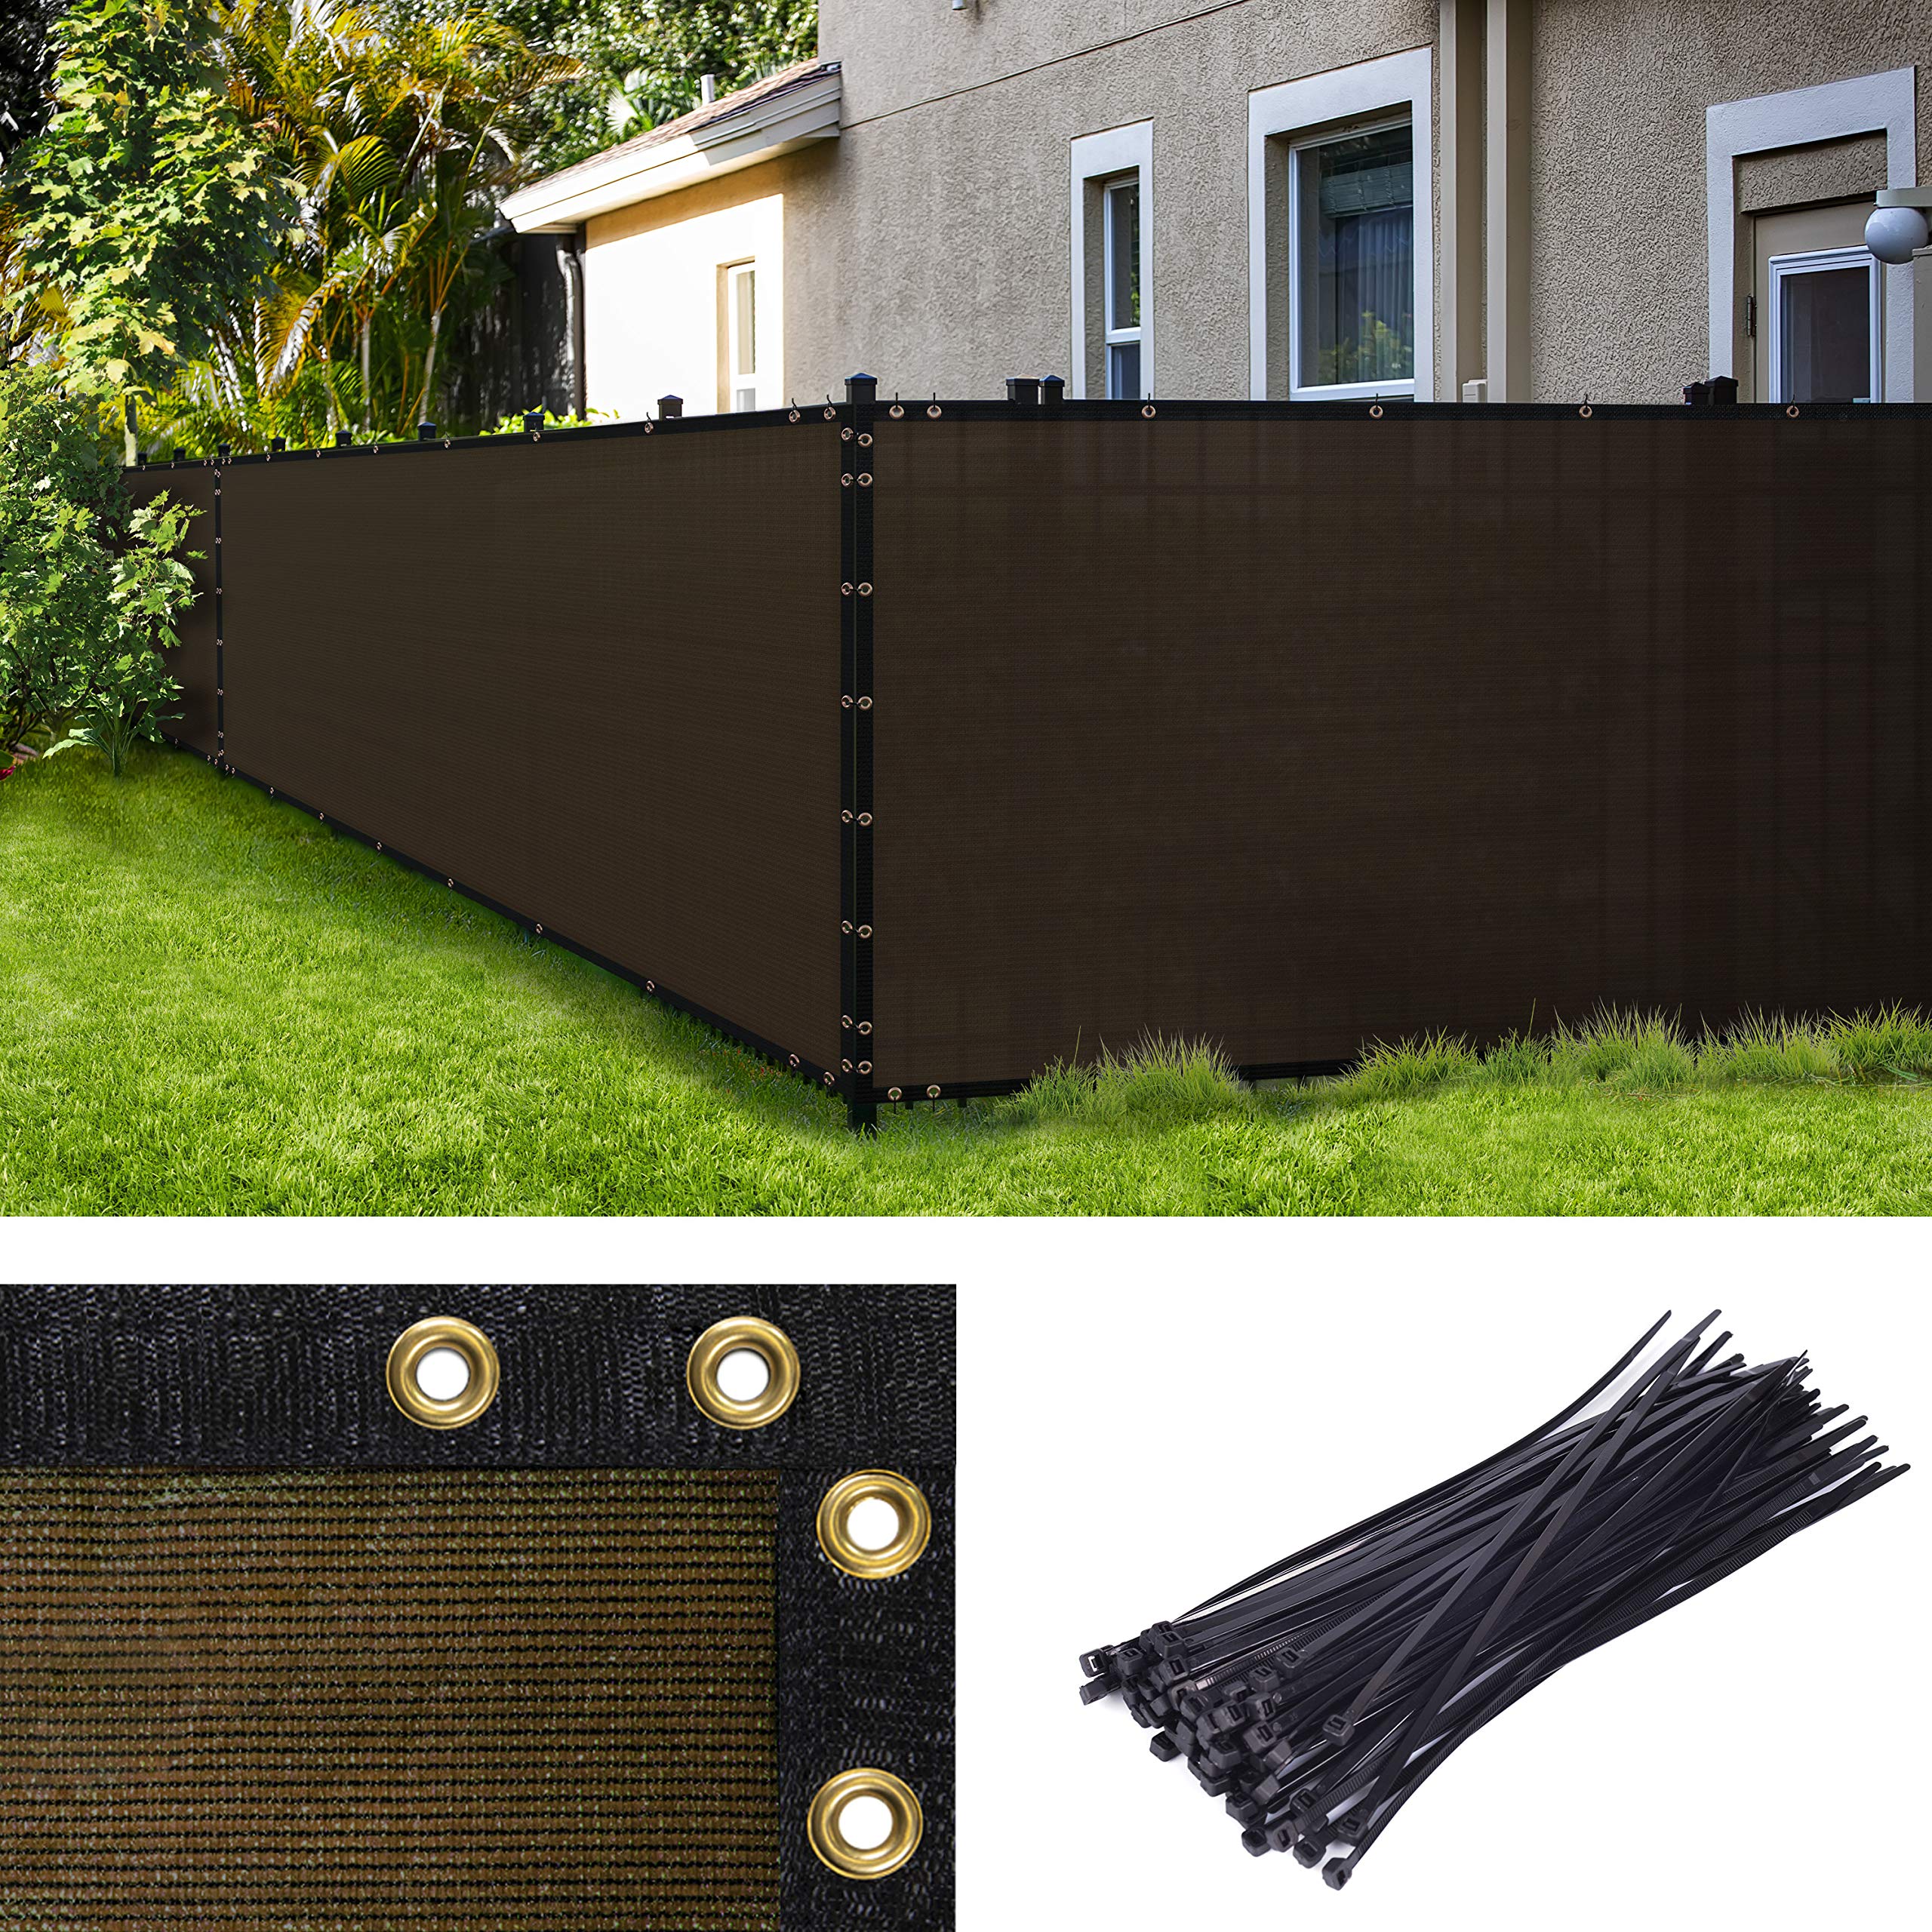 Amgo Custom Made 5' x 177' Brown Fence Privacy Screen Windscreen with Bindings & Grommets, Heavy Duty for Commercial and Residen